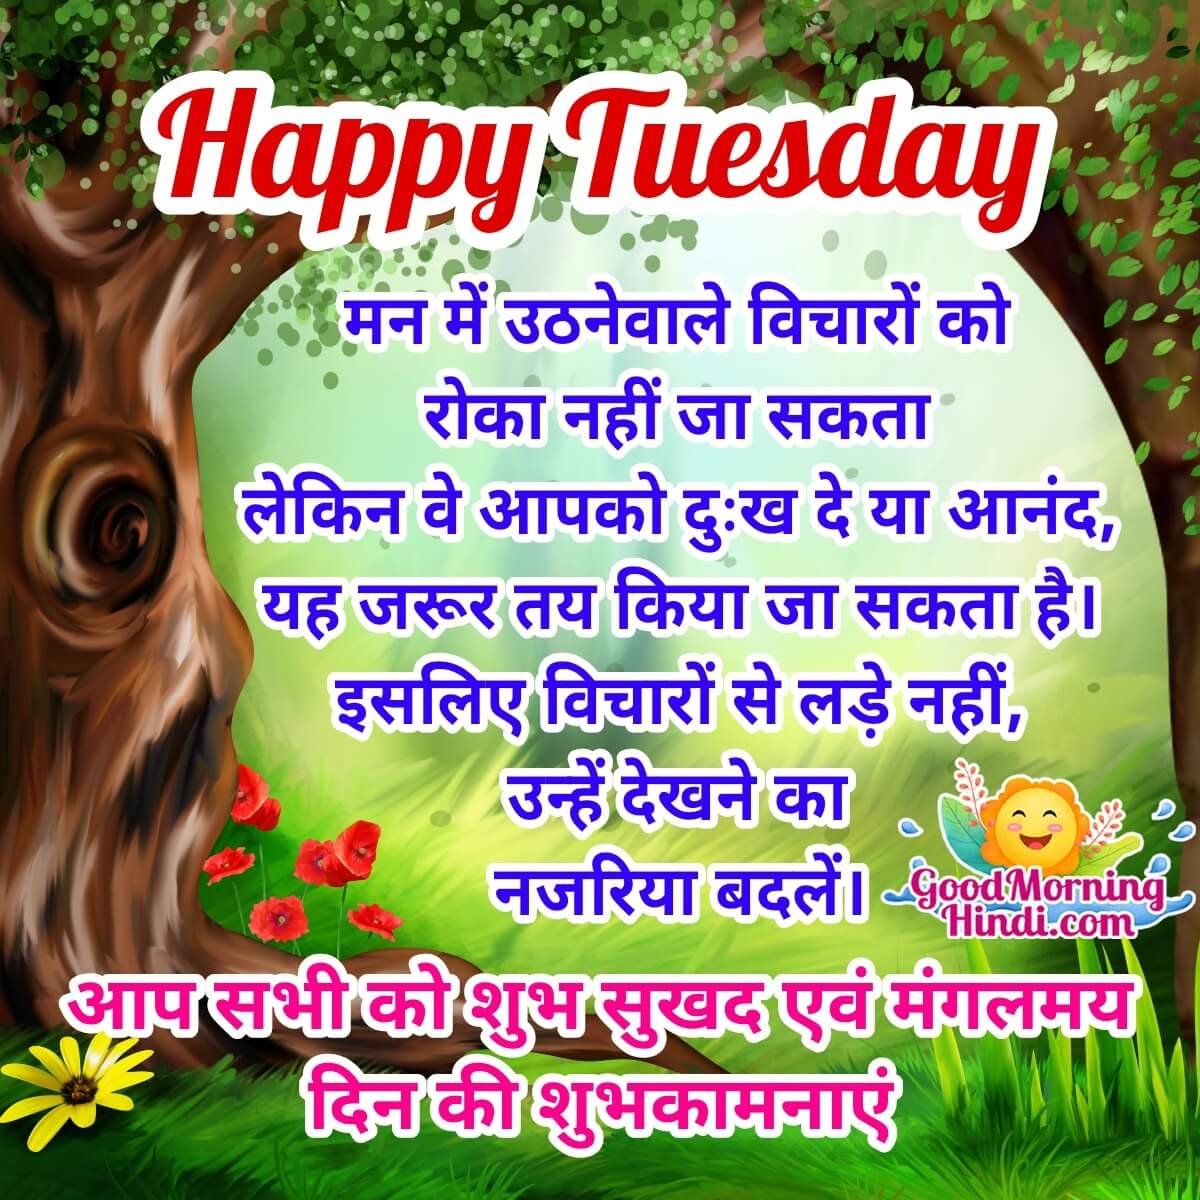 Top 999+ good morning tuesday images in hindi – Amazing Collection good morning tuesday images in hindi Full 4K